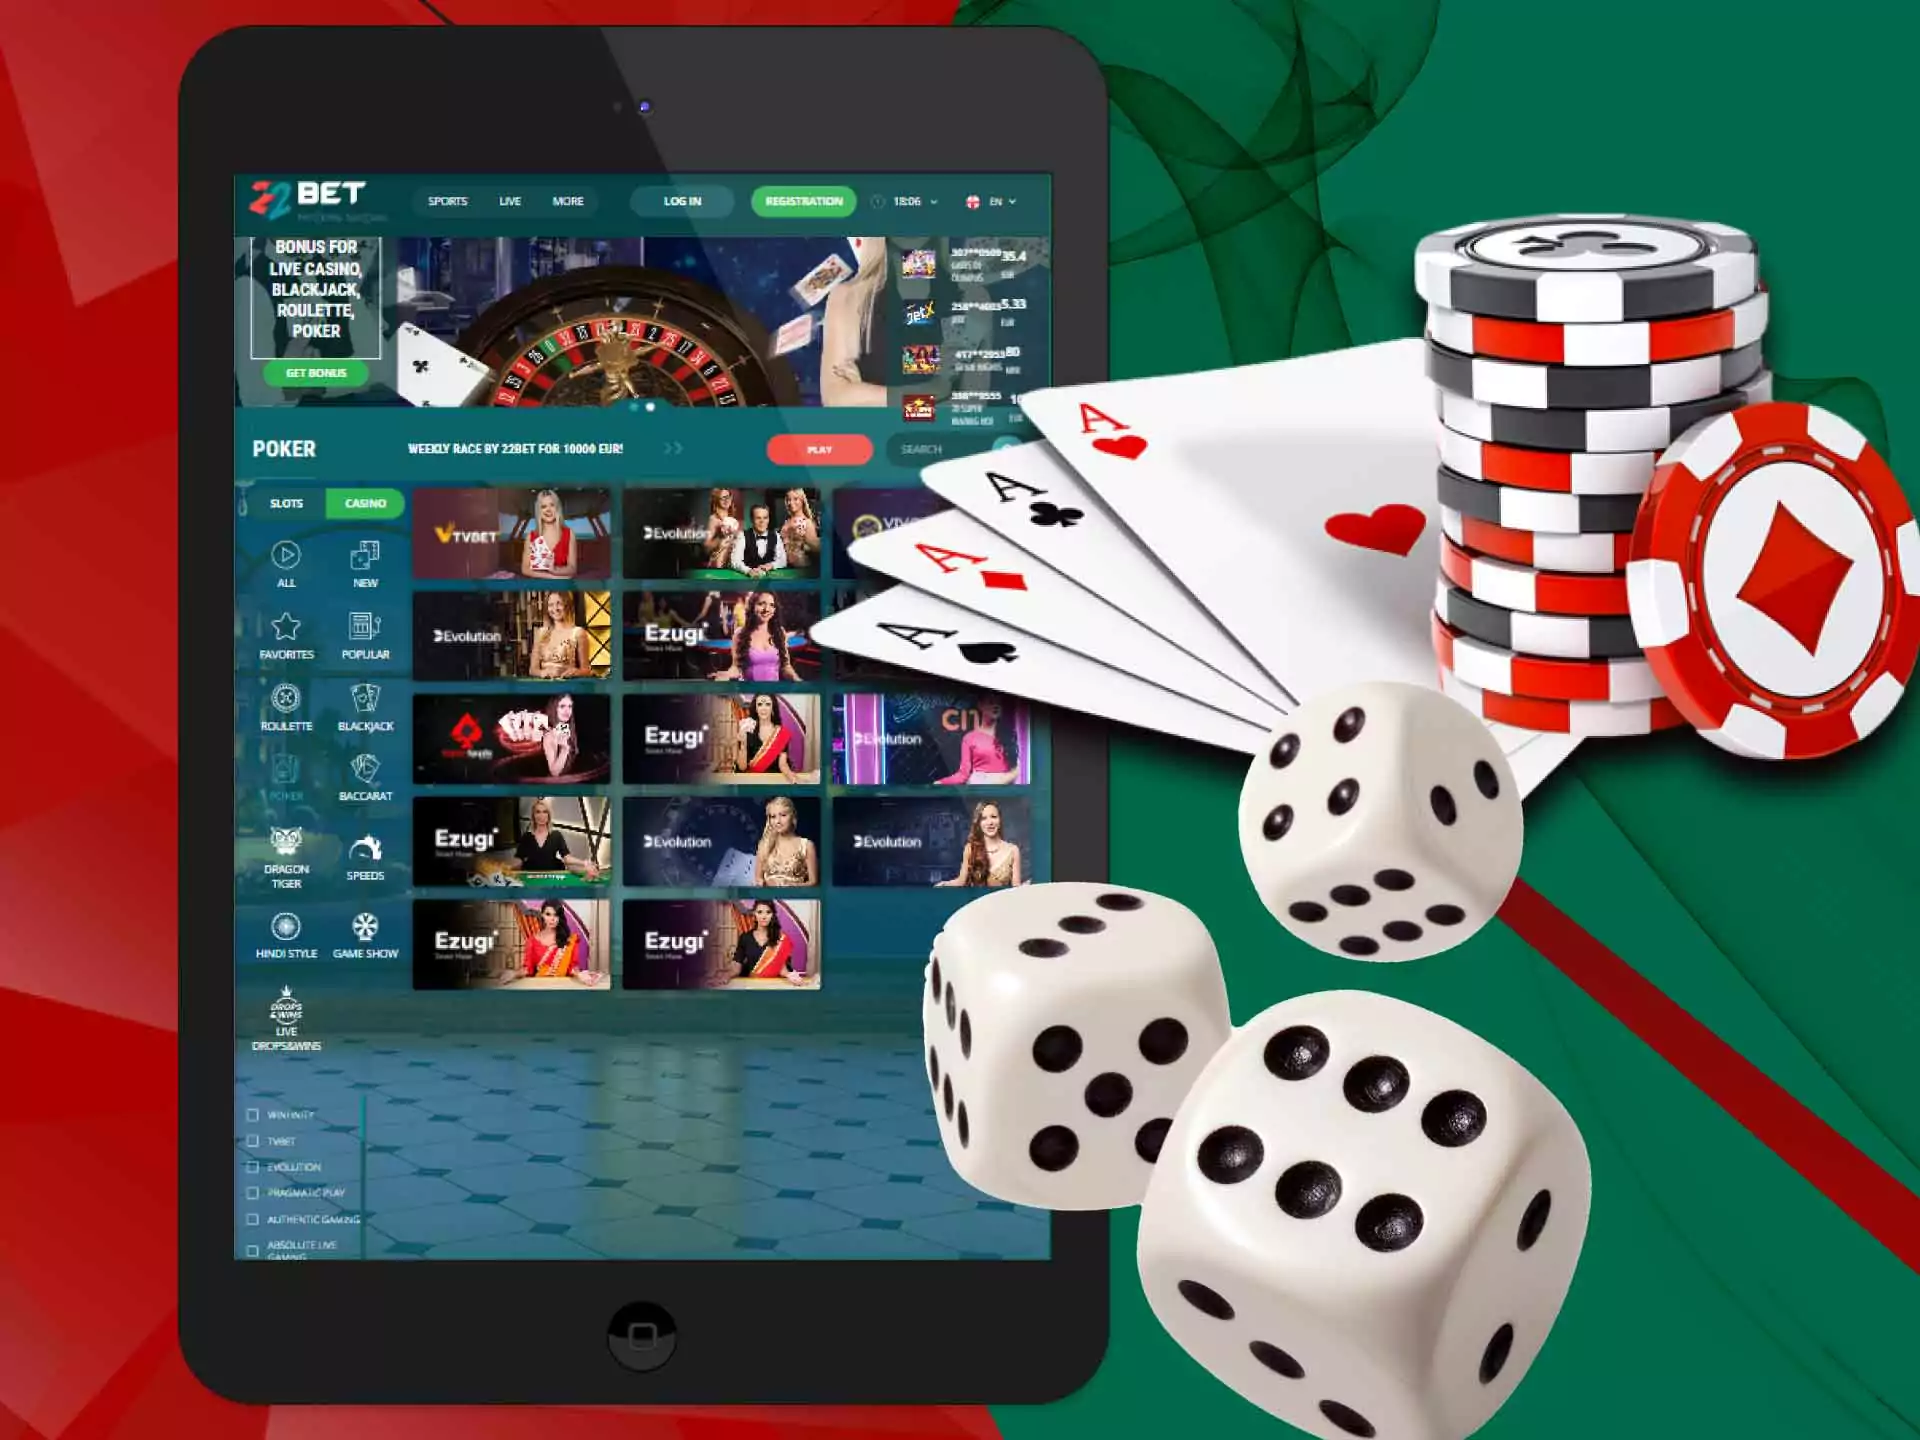 Play poker games in the 22Bet casino.